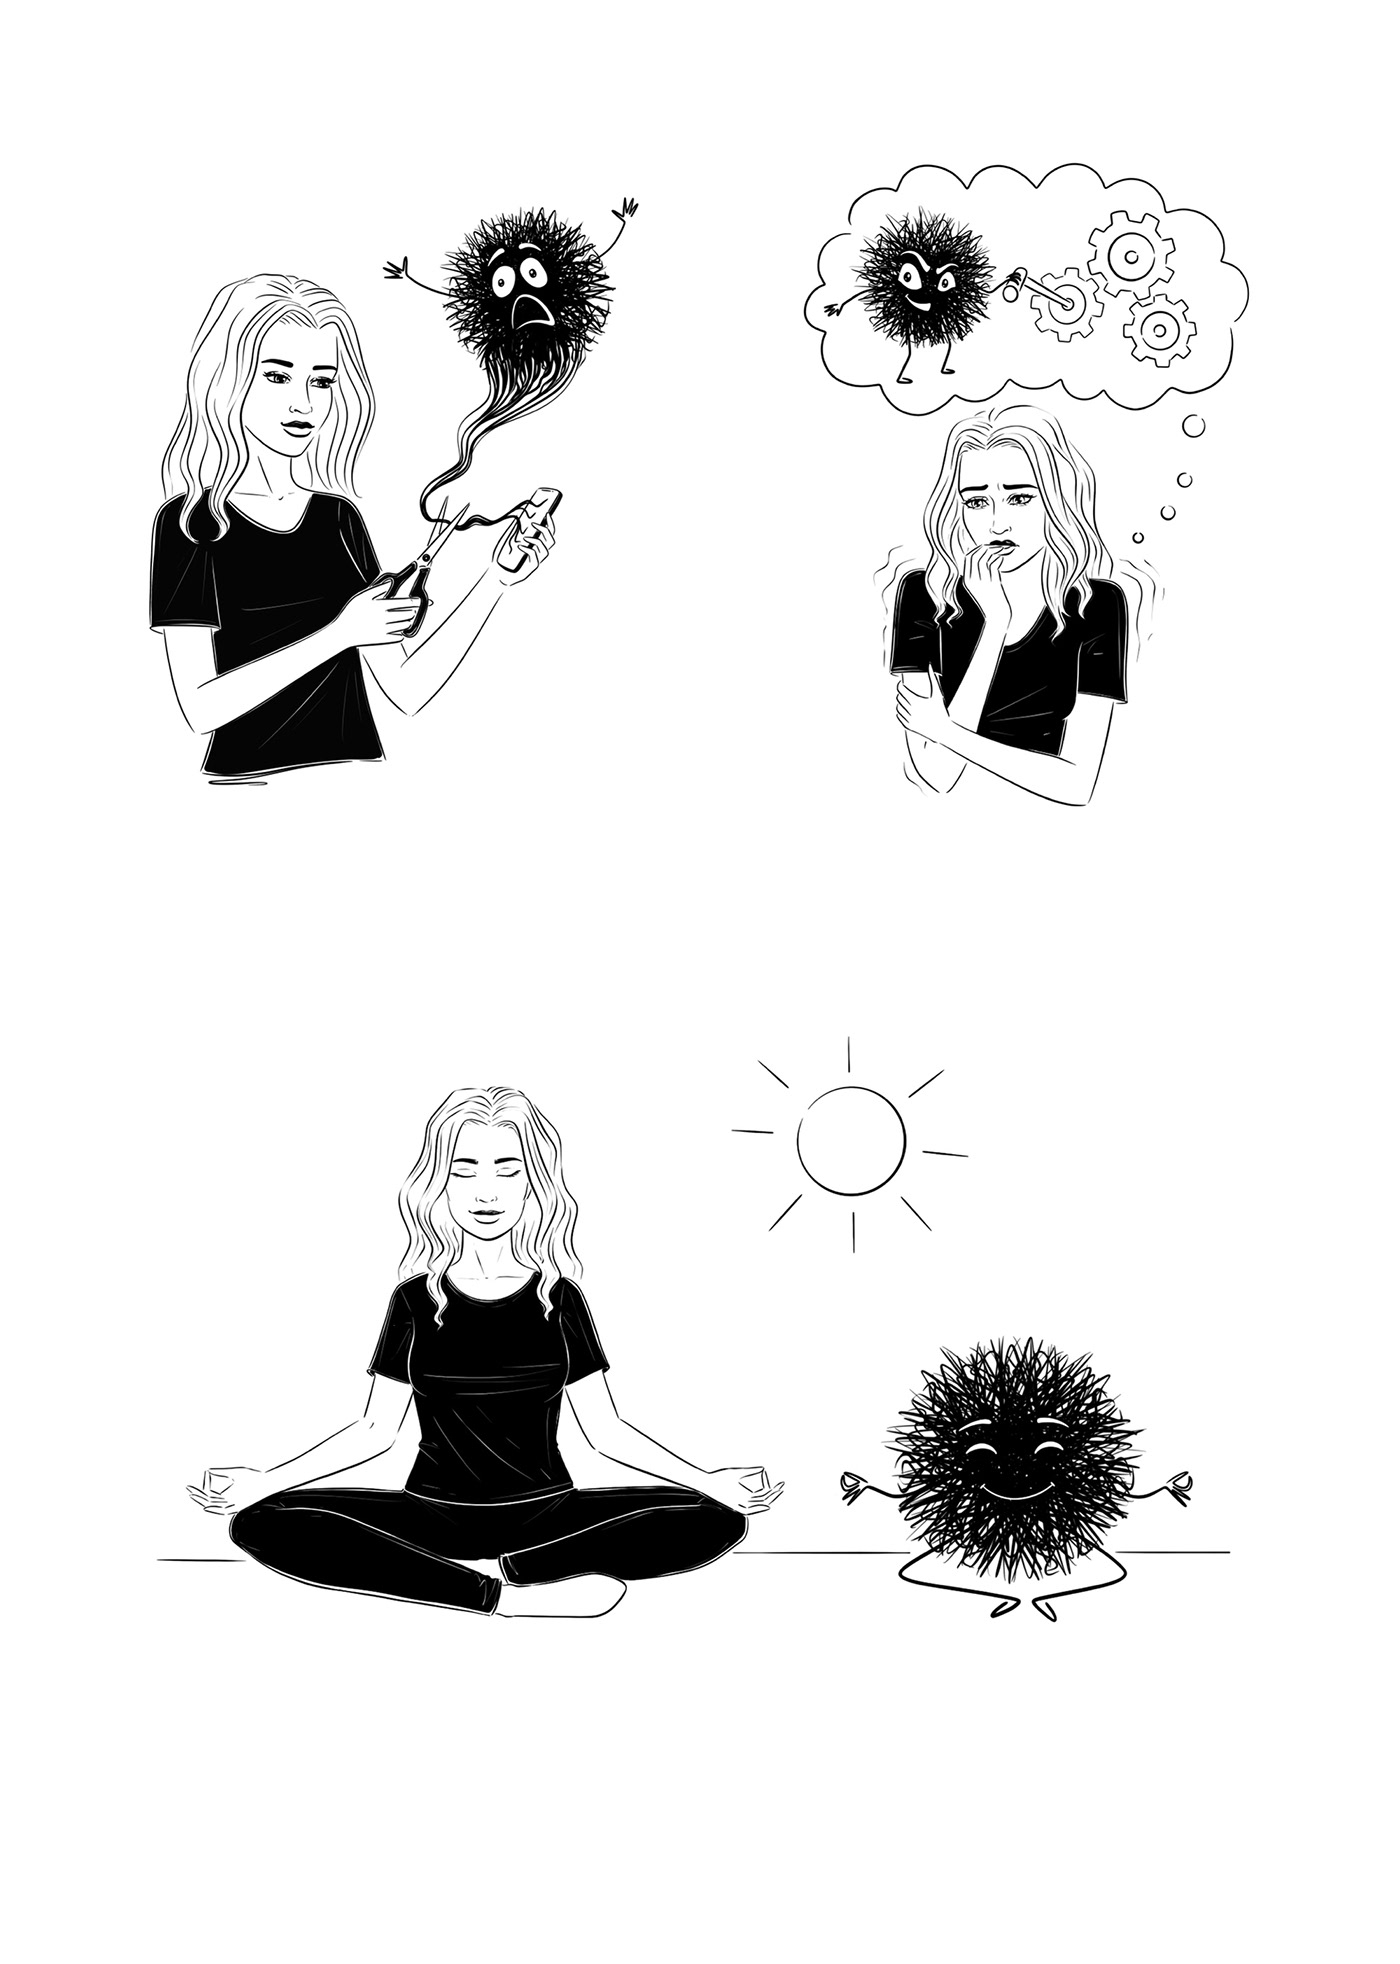 illustrations for the stress related topics. Woman dealind with anxiety